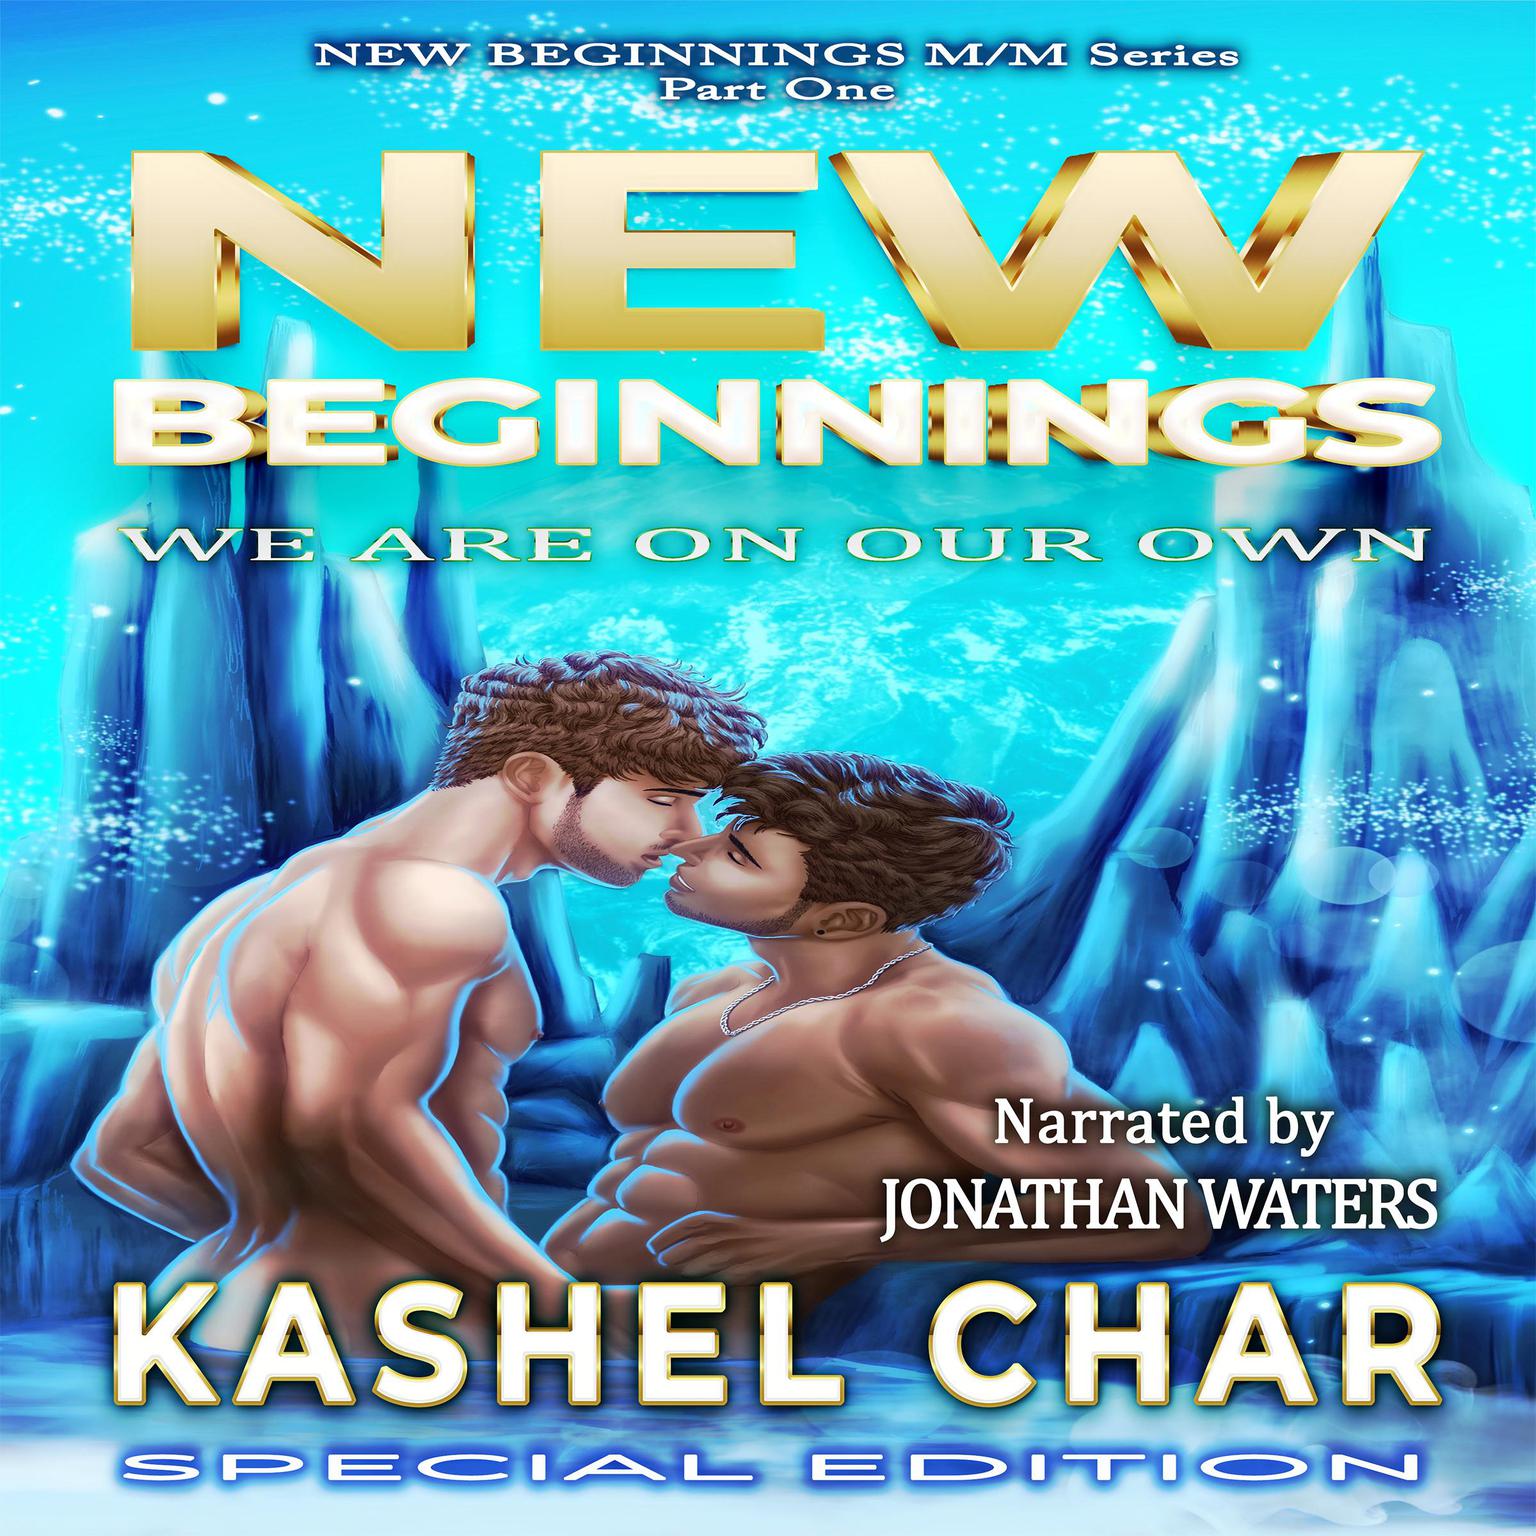 New Beginnings: We Are On Our Own (New Beginnings M/M Series Book 1) Audiobook, by Kashel Char